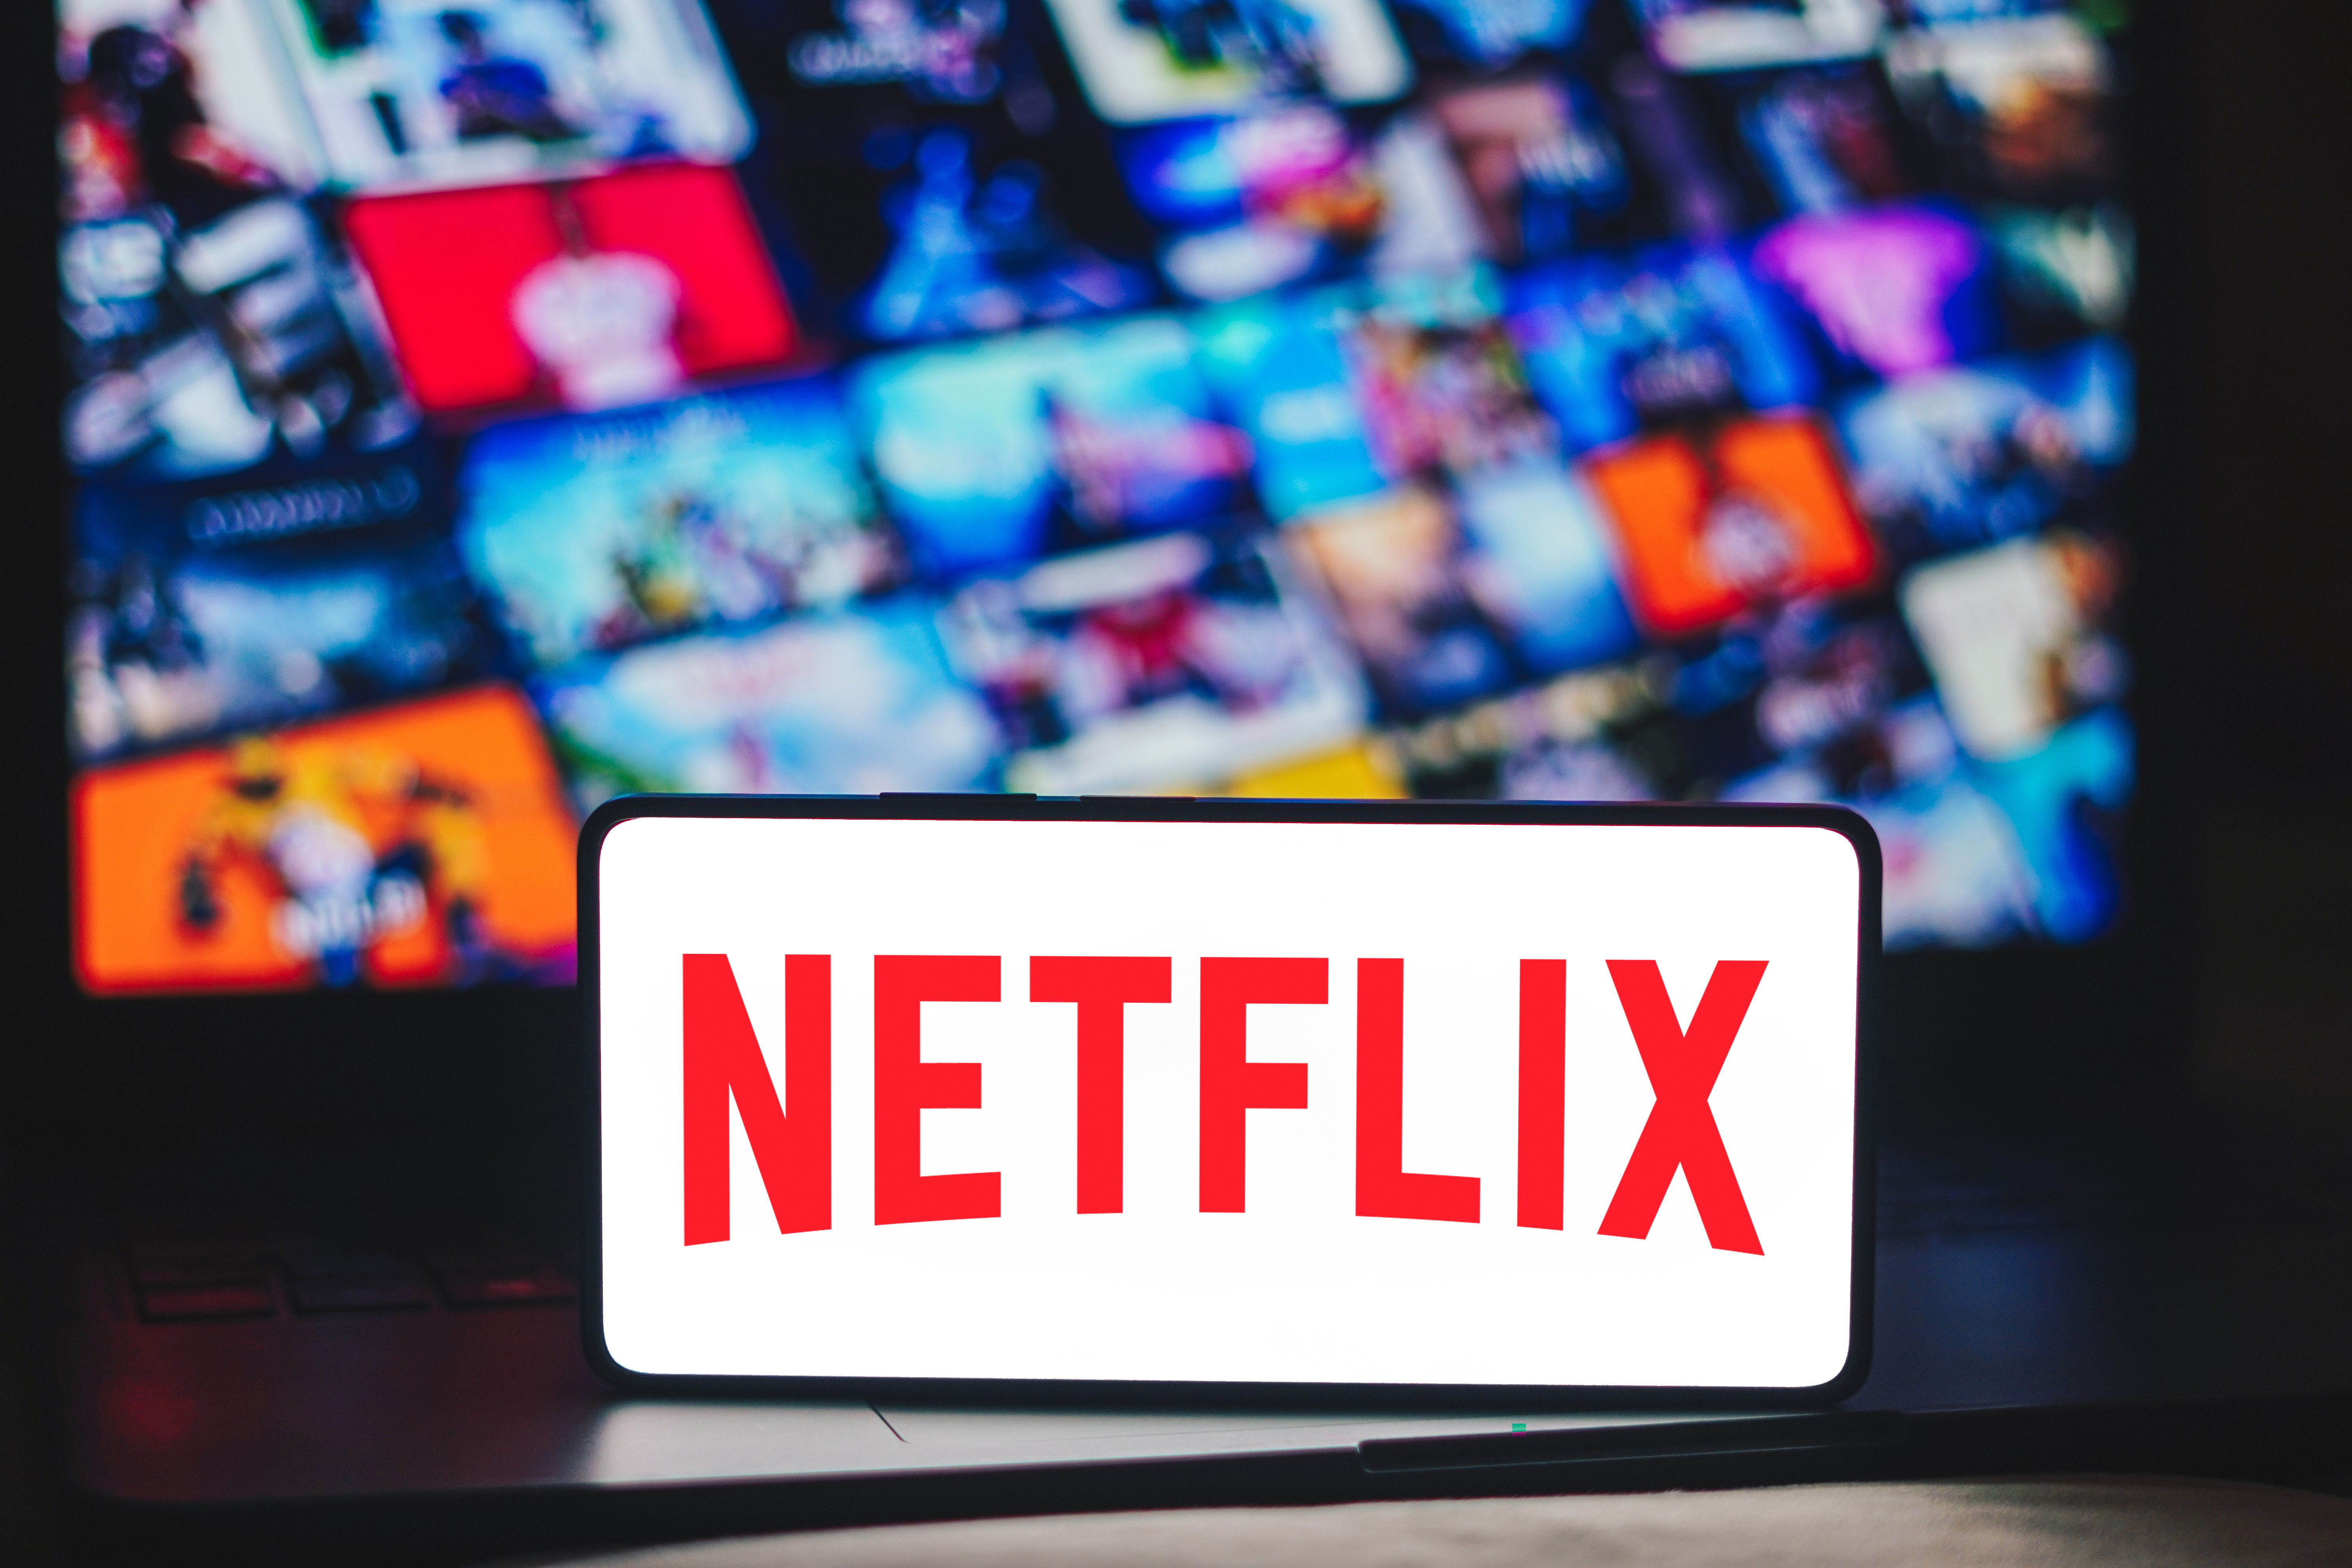 Netflix viewers fuming as some accounts are switched to ad-filled plan